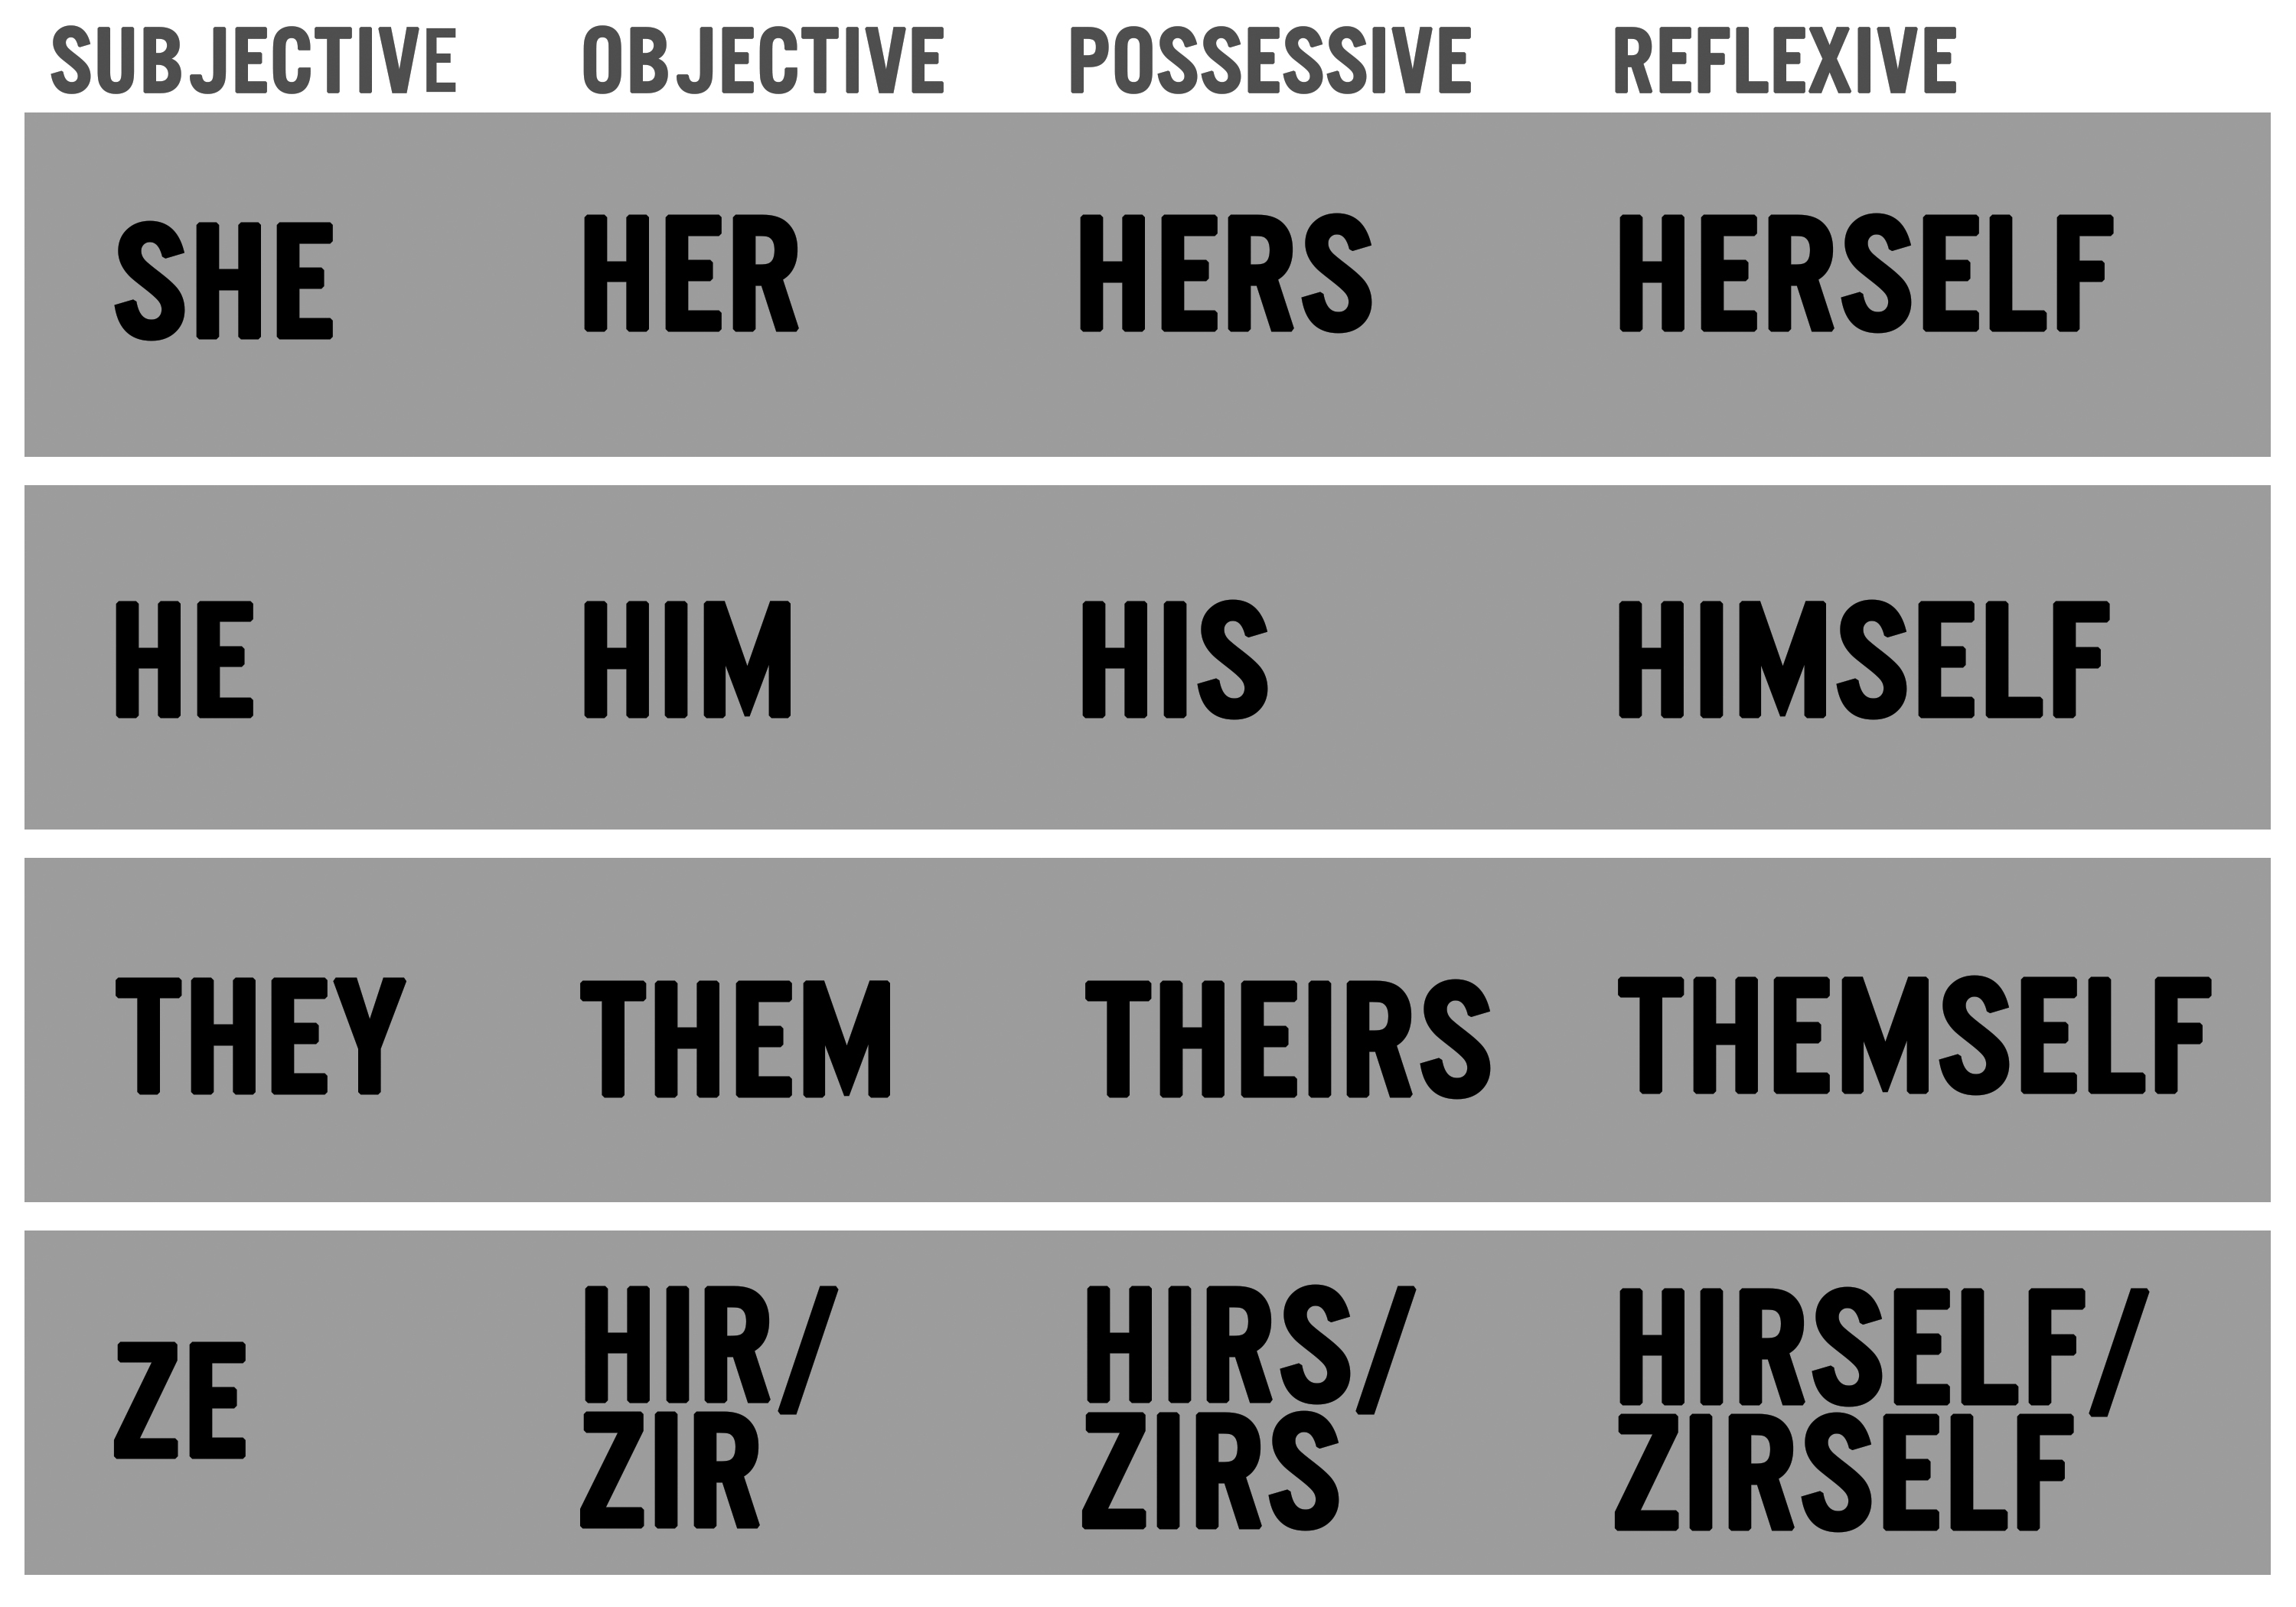 Gallery of Male Pronouns.